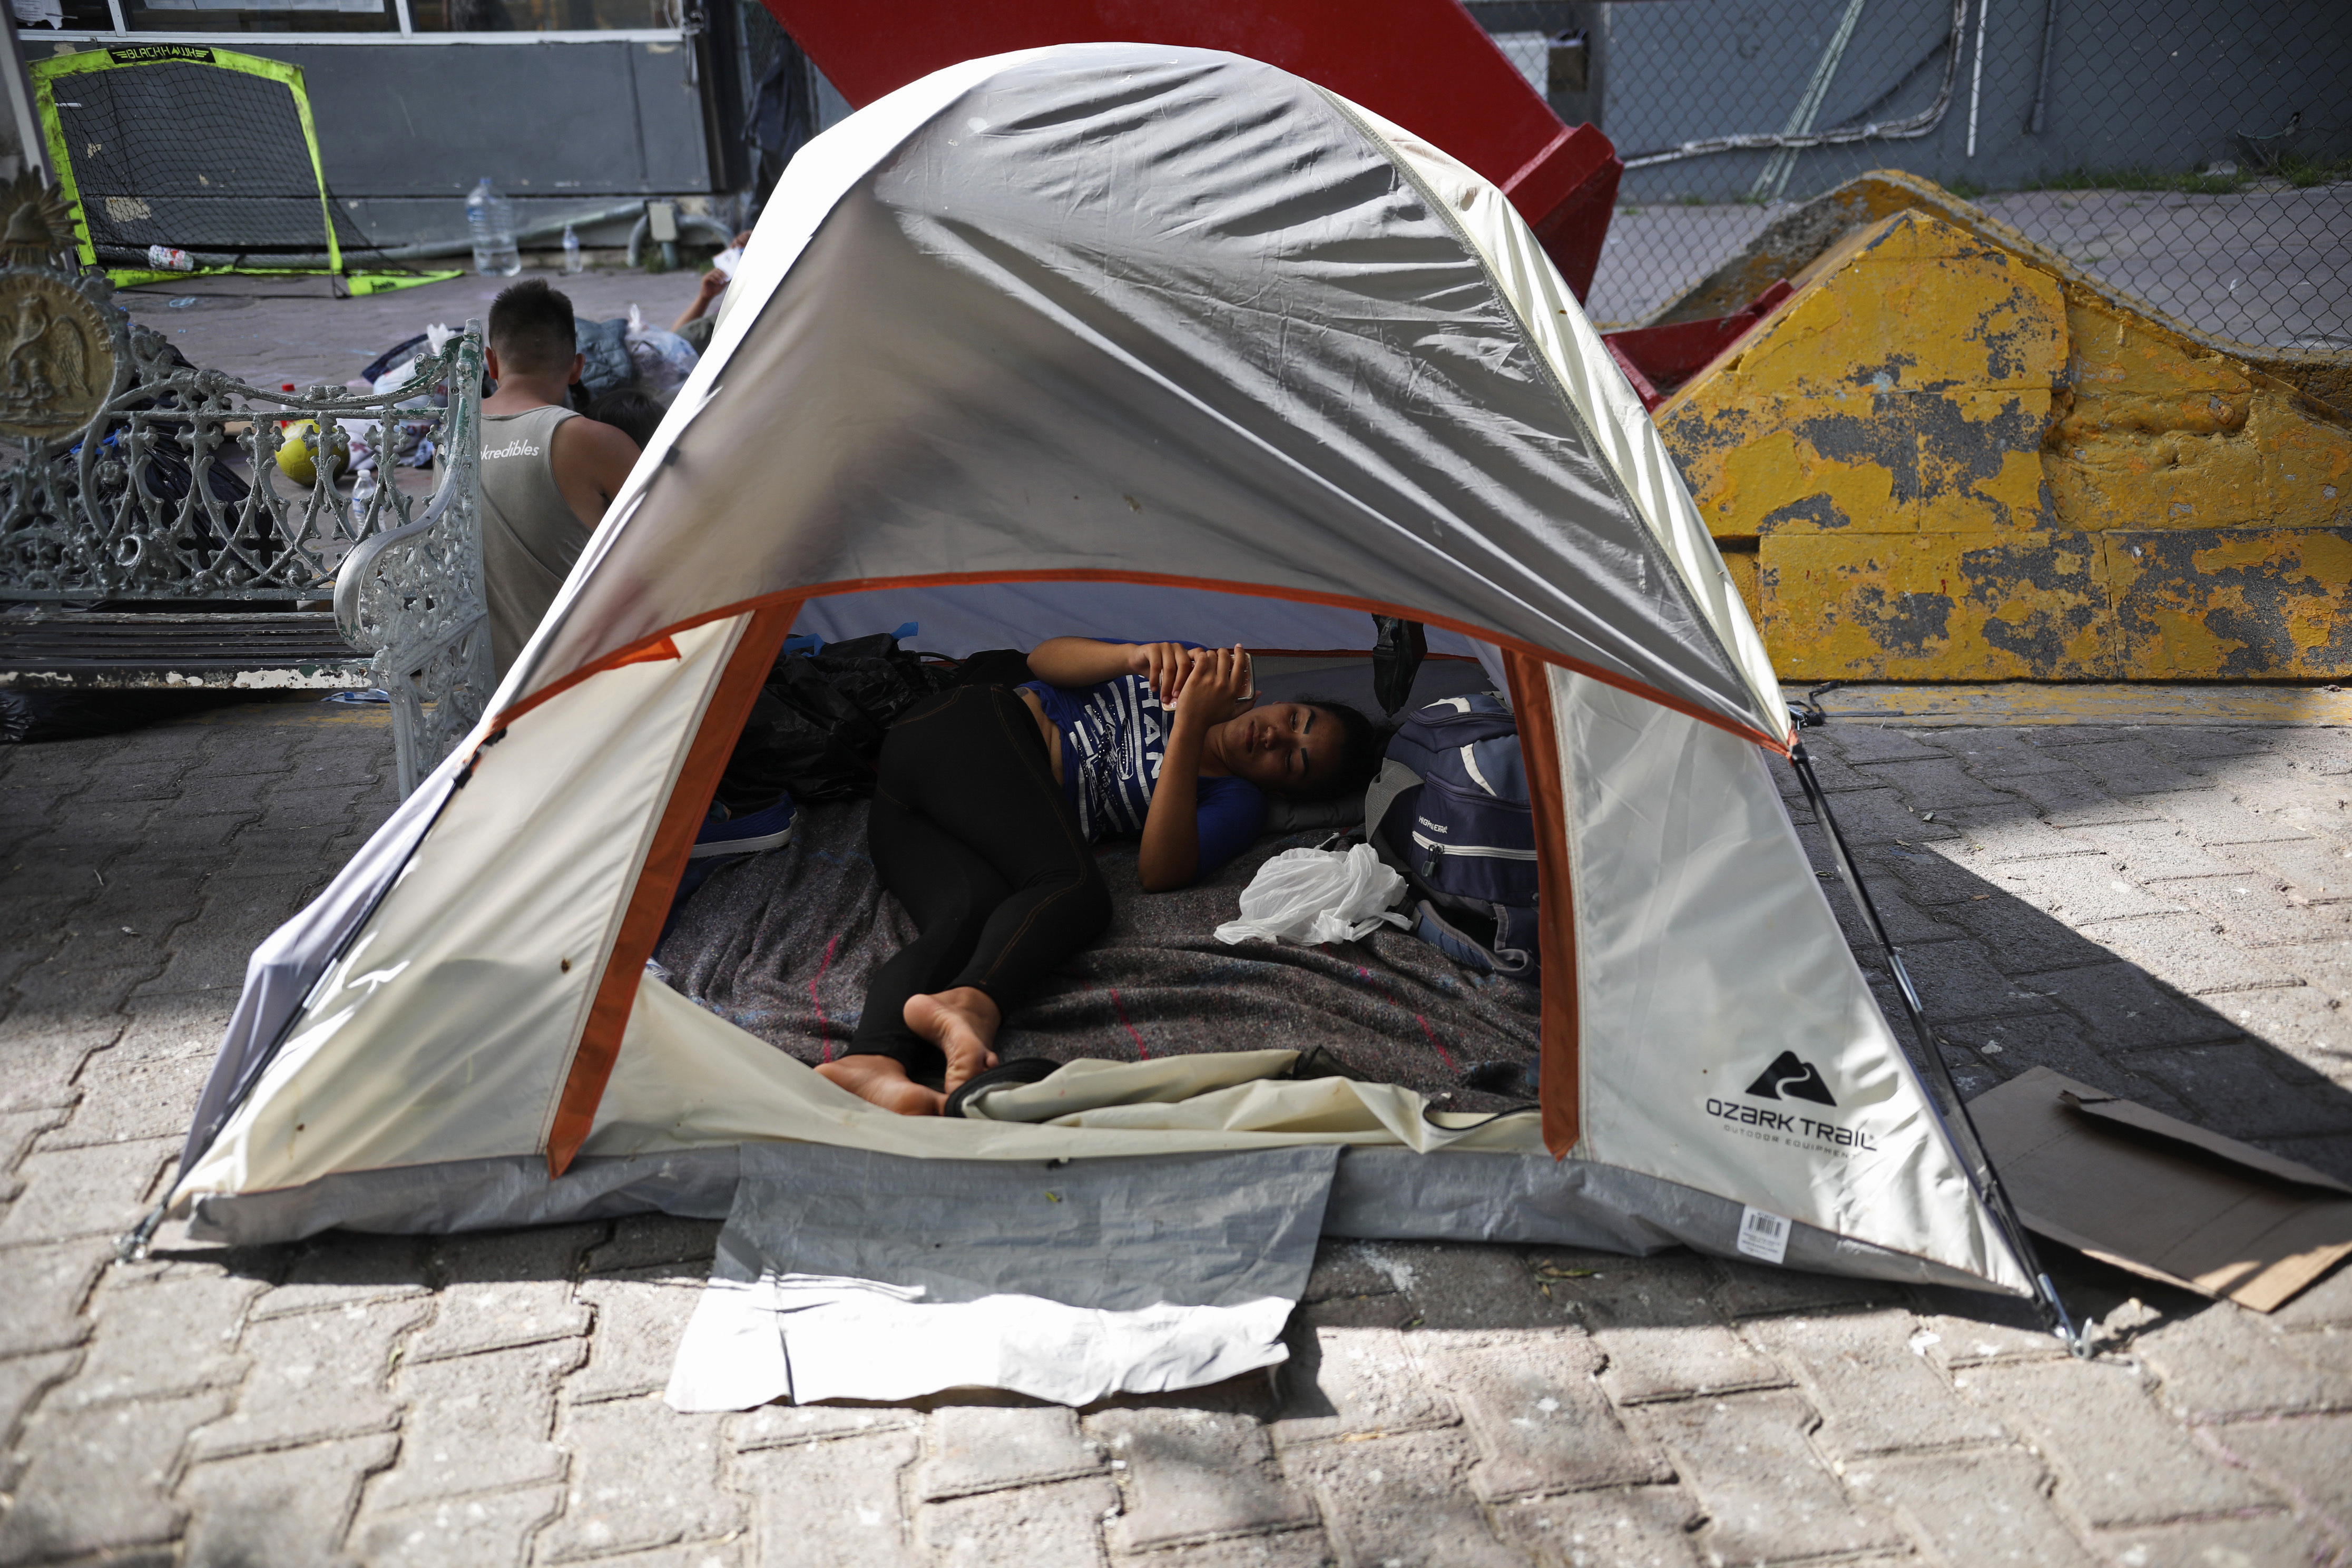 A migrant rests inside a tent pitched near a Mexican immigration center where people have set up camp to sleep in Matamoros, Mexico, Thursday, Aug. 1, 2019, on the border with Brownsville, Texas. The United States government has sent some 800 mostly Central American and Cuban immigrants back to this northern Mexico border city since expanding its controversial plan to this easternmost point on the shared border two weeks ago, according to local Mexican authorities. (AP Photo/Emilio Espejel)